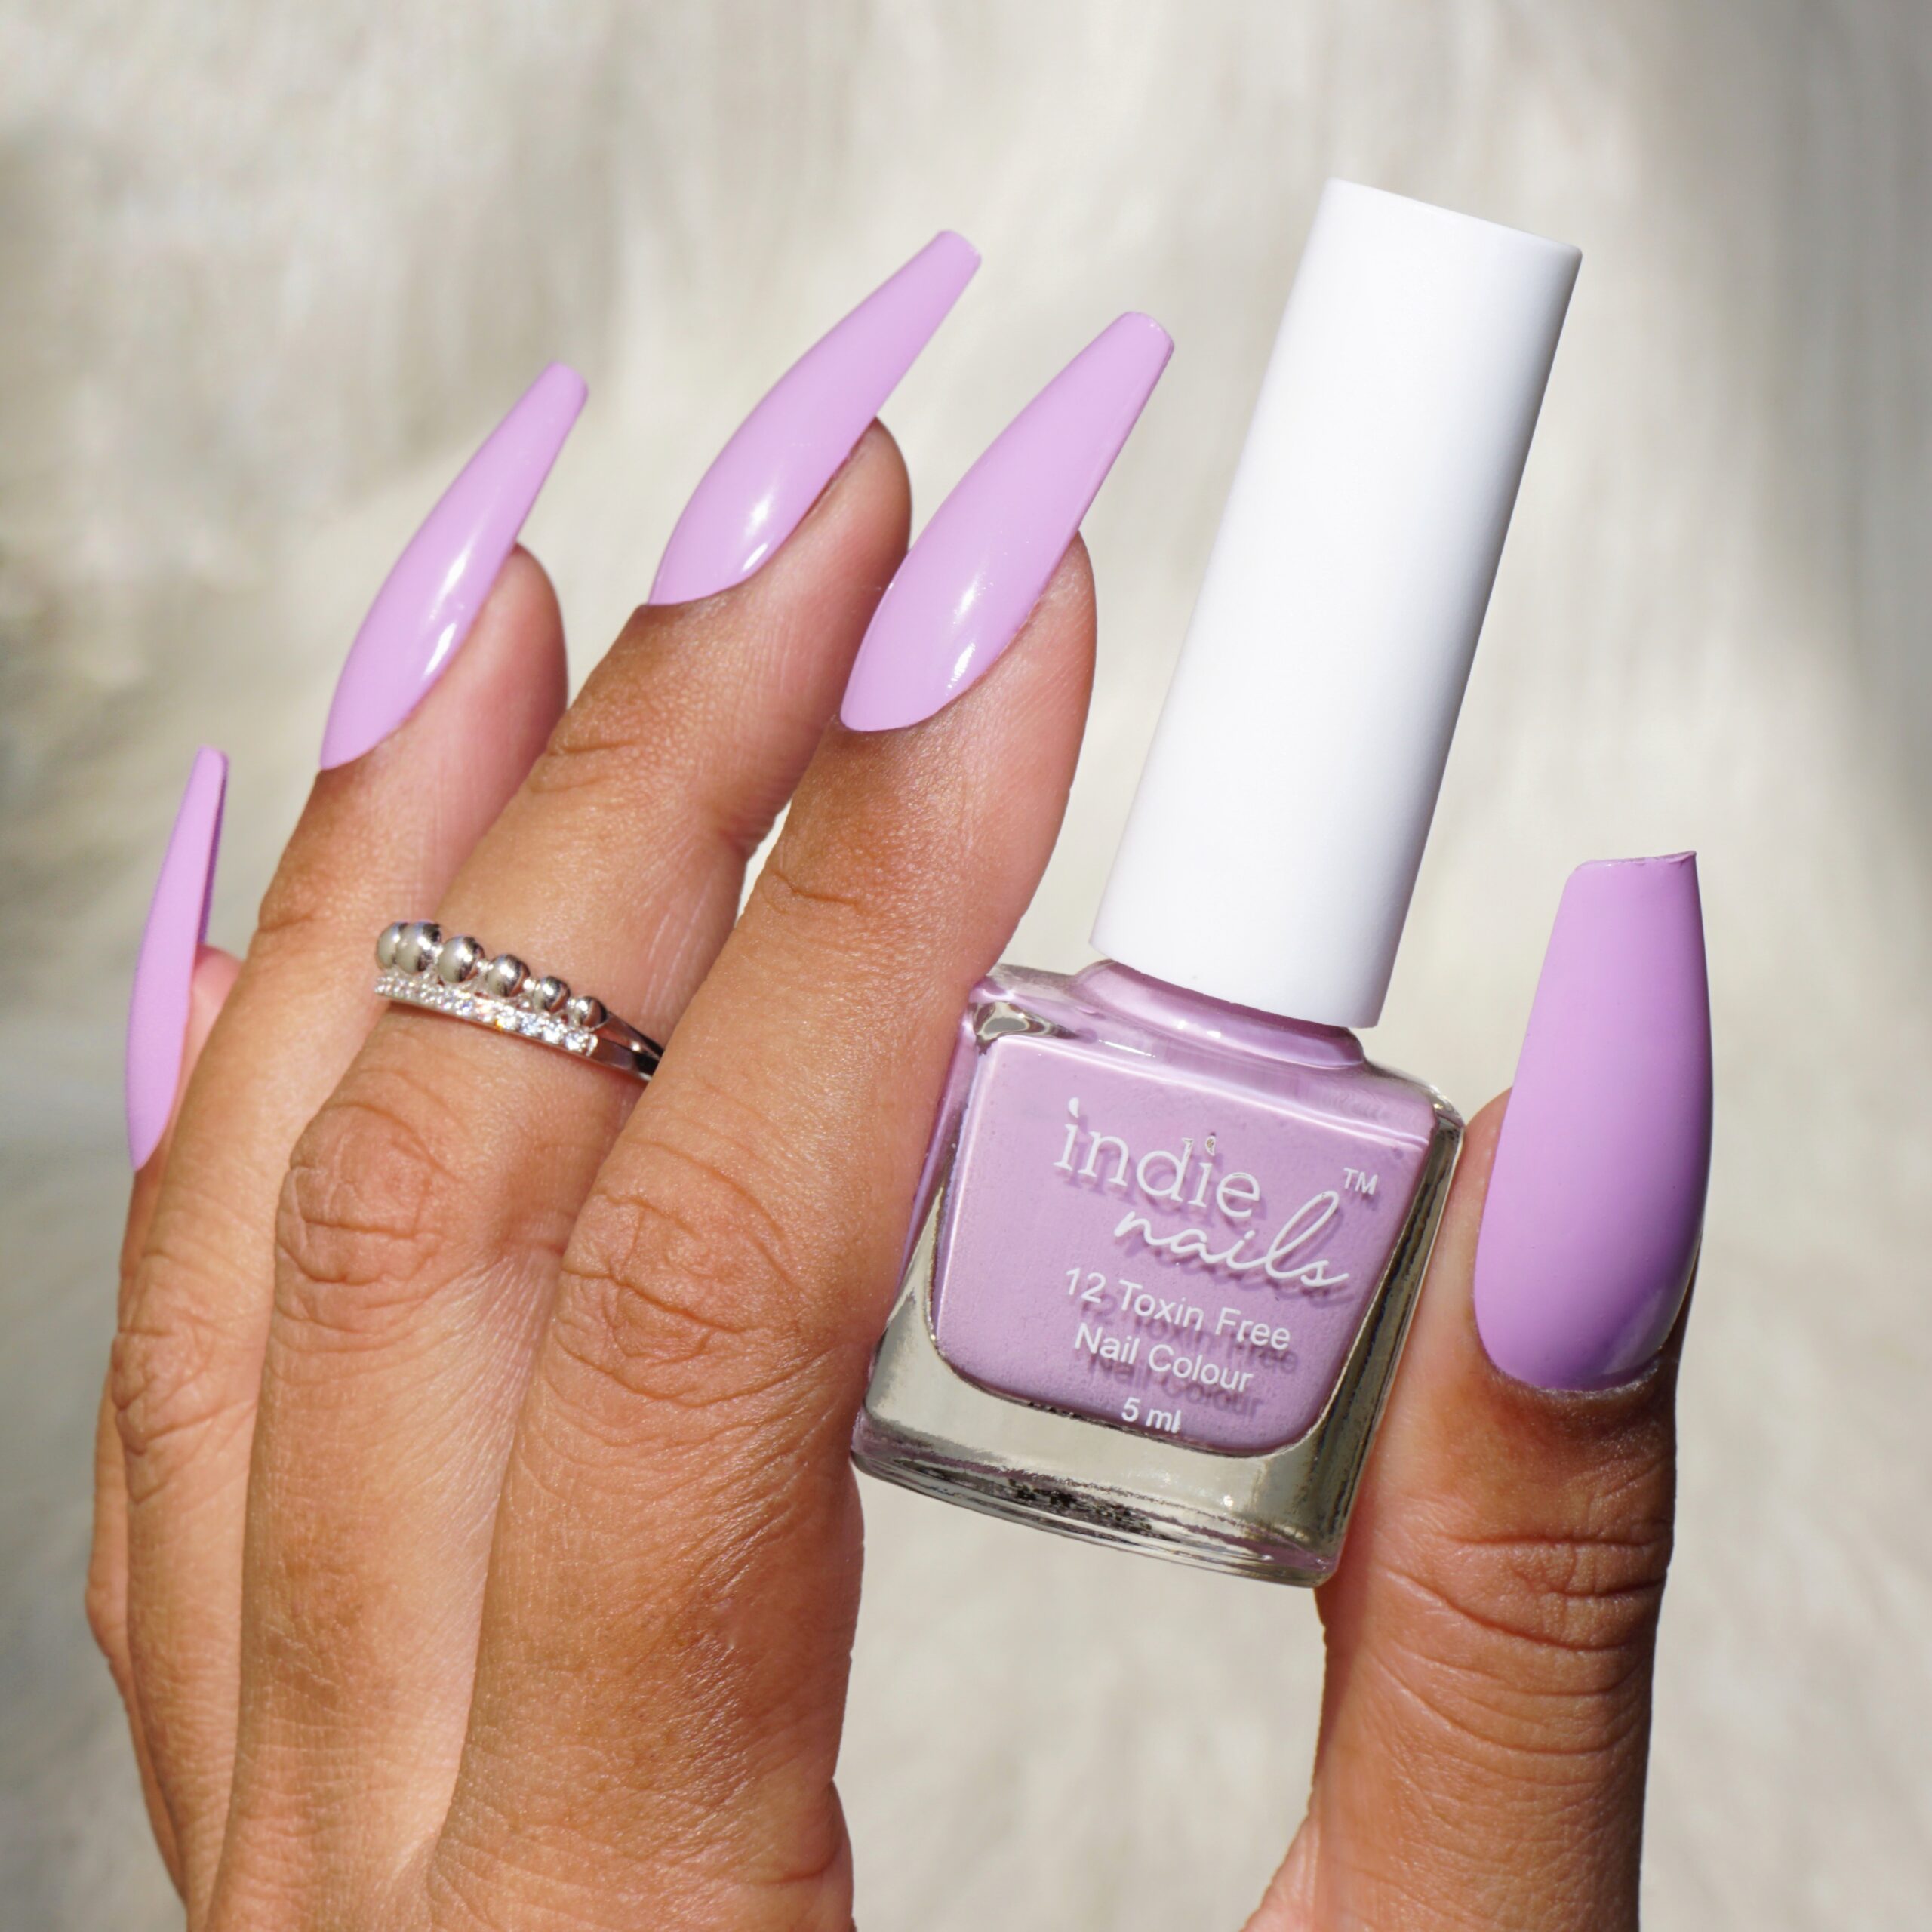 Buy Beromt Holo Chunky Lilac Bridge (Lavender Purple) Nail Polish | lovely  and delicate shade of lavender with a pop - BNP215 Online at Low Prices in  India - Amazon.in